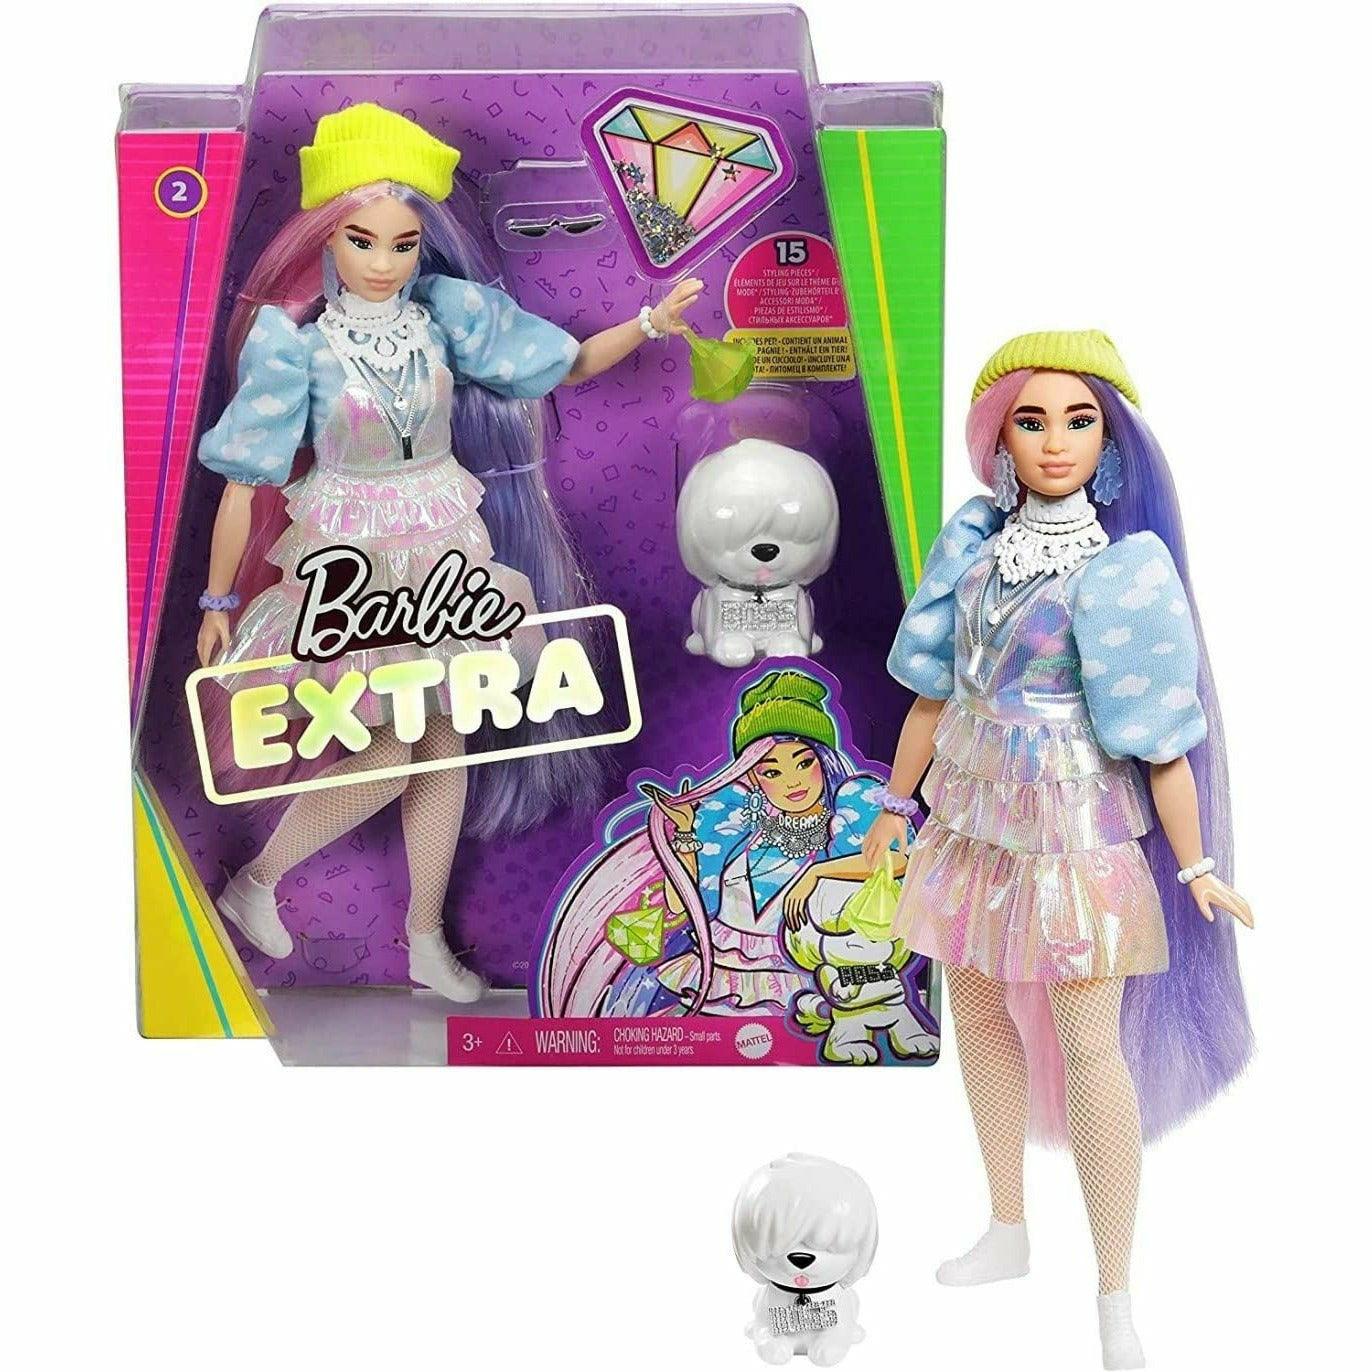 Barbie Extra Doll #2 in Shimmery Look with Pet Puppy, Pink & Purple Fantasy Hair, Layered Outfit & Accessories - BumbleToys - 5-7 Years, Barbie, Dolls, Fashion Dolls & Accessories, Girls, Miniature Dolls & Accessories, OXE, Pre-Order